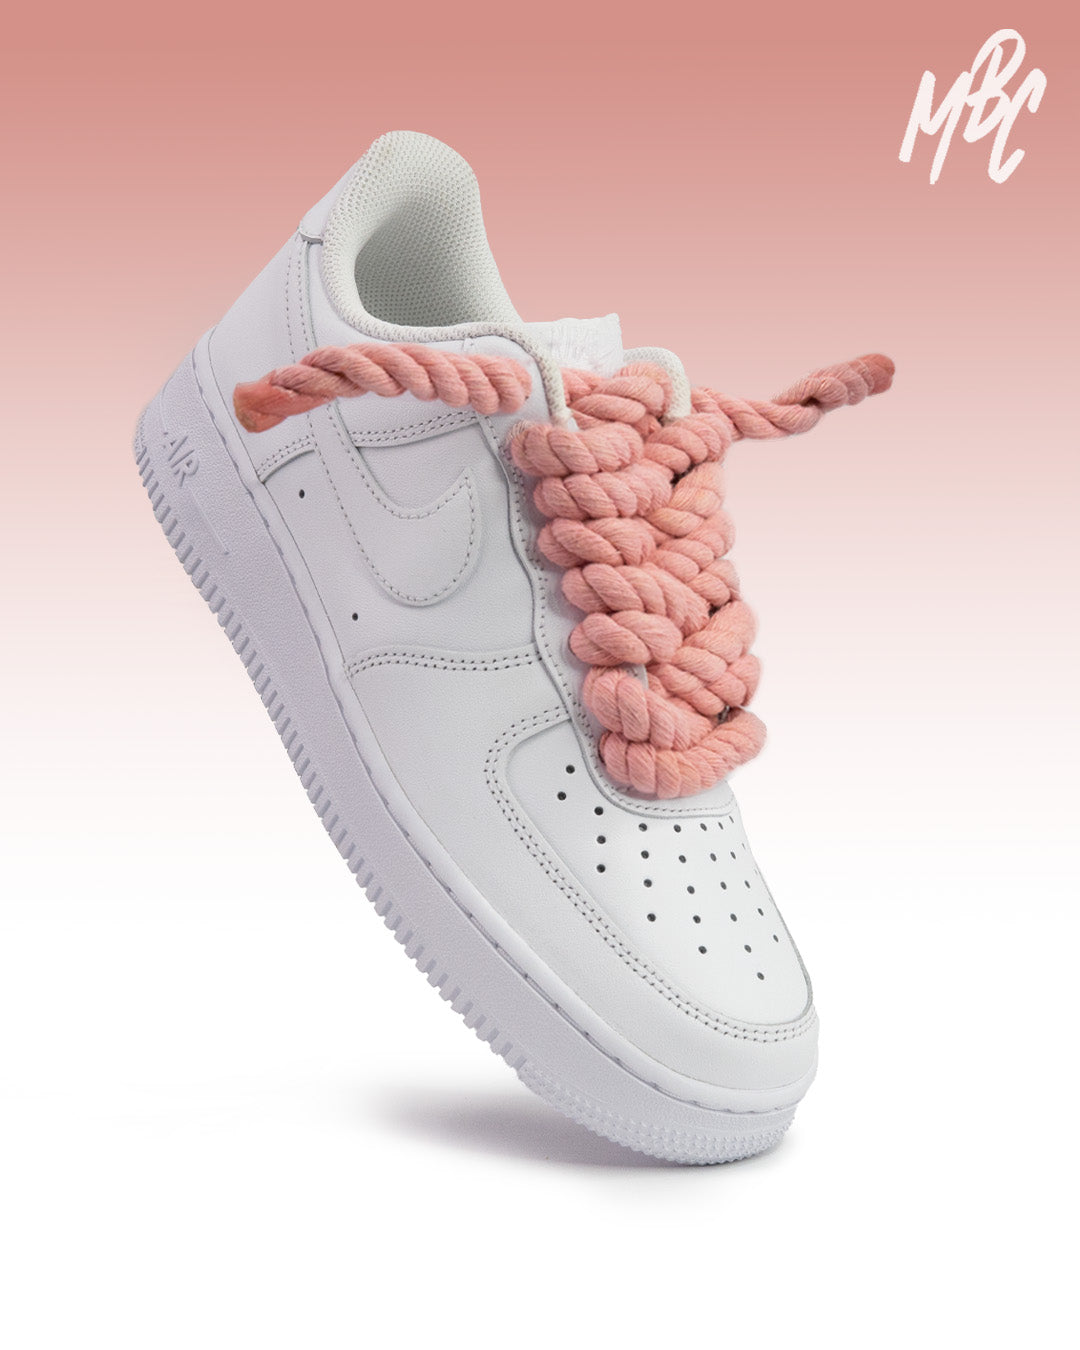 Custom Air Force 1s Many Sizes Available / Womens Shoes / Big Kids